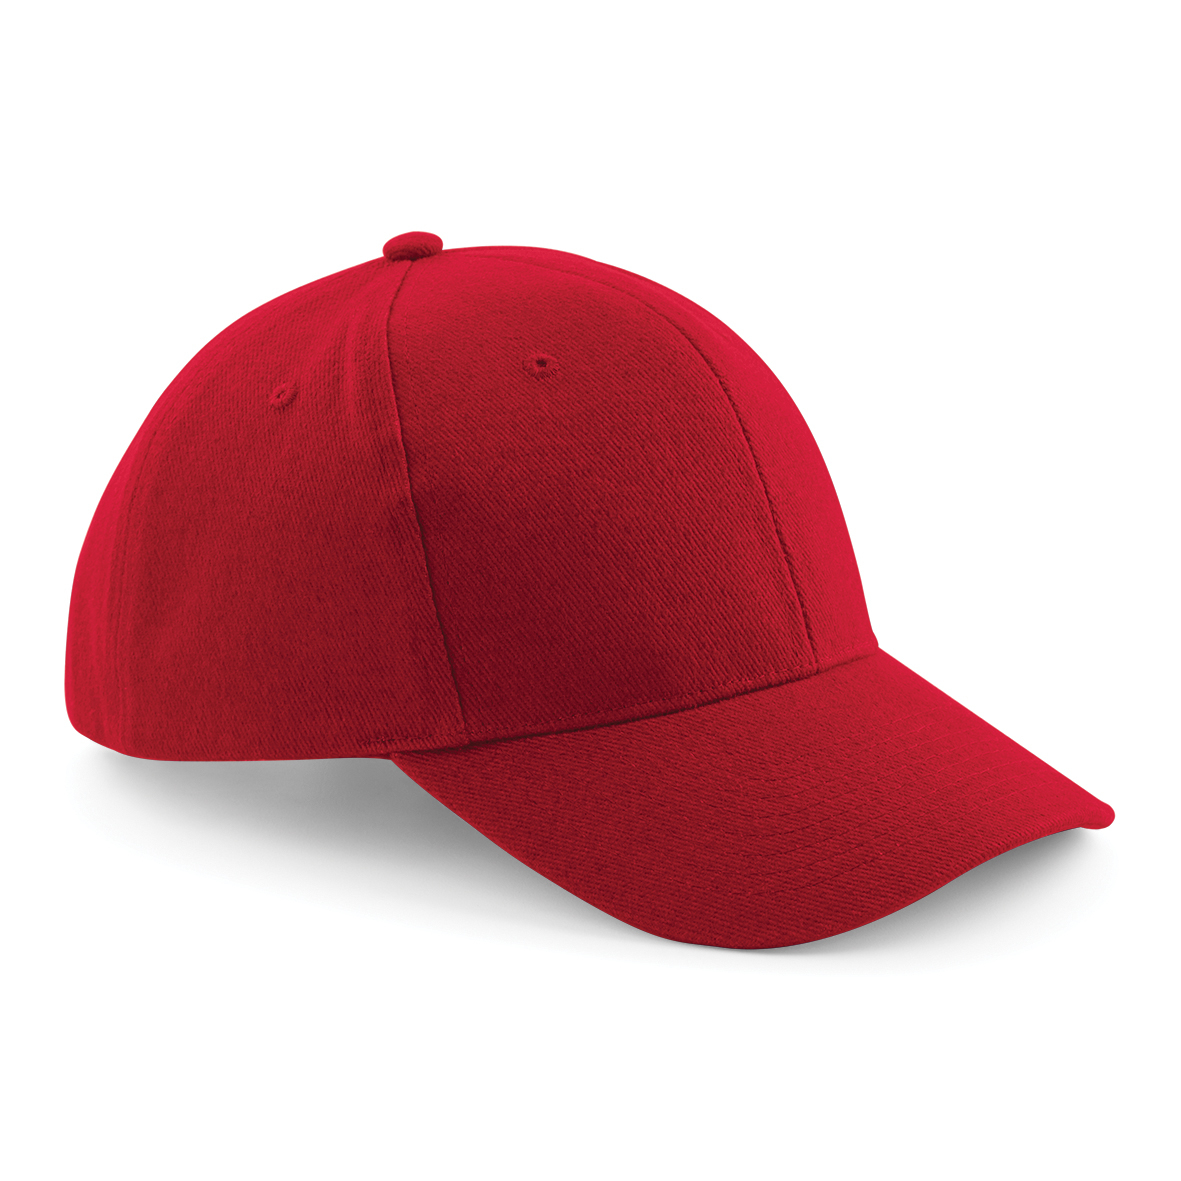 Pro-Style Heavy Brushed Cotton Cap in red